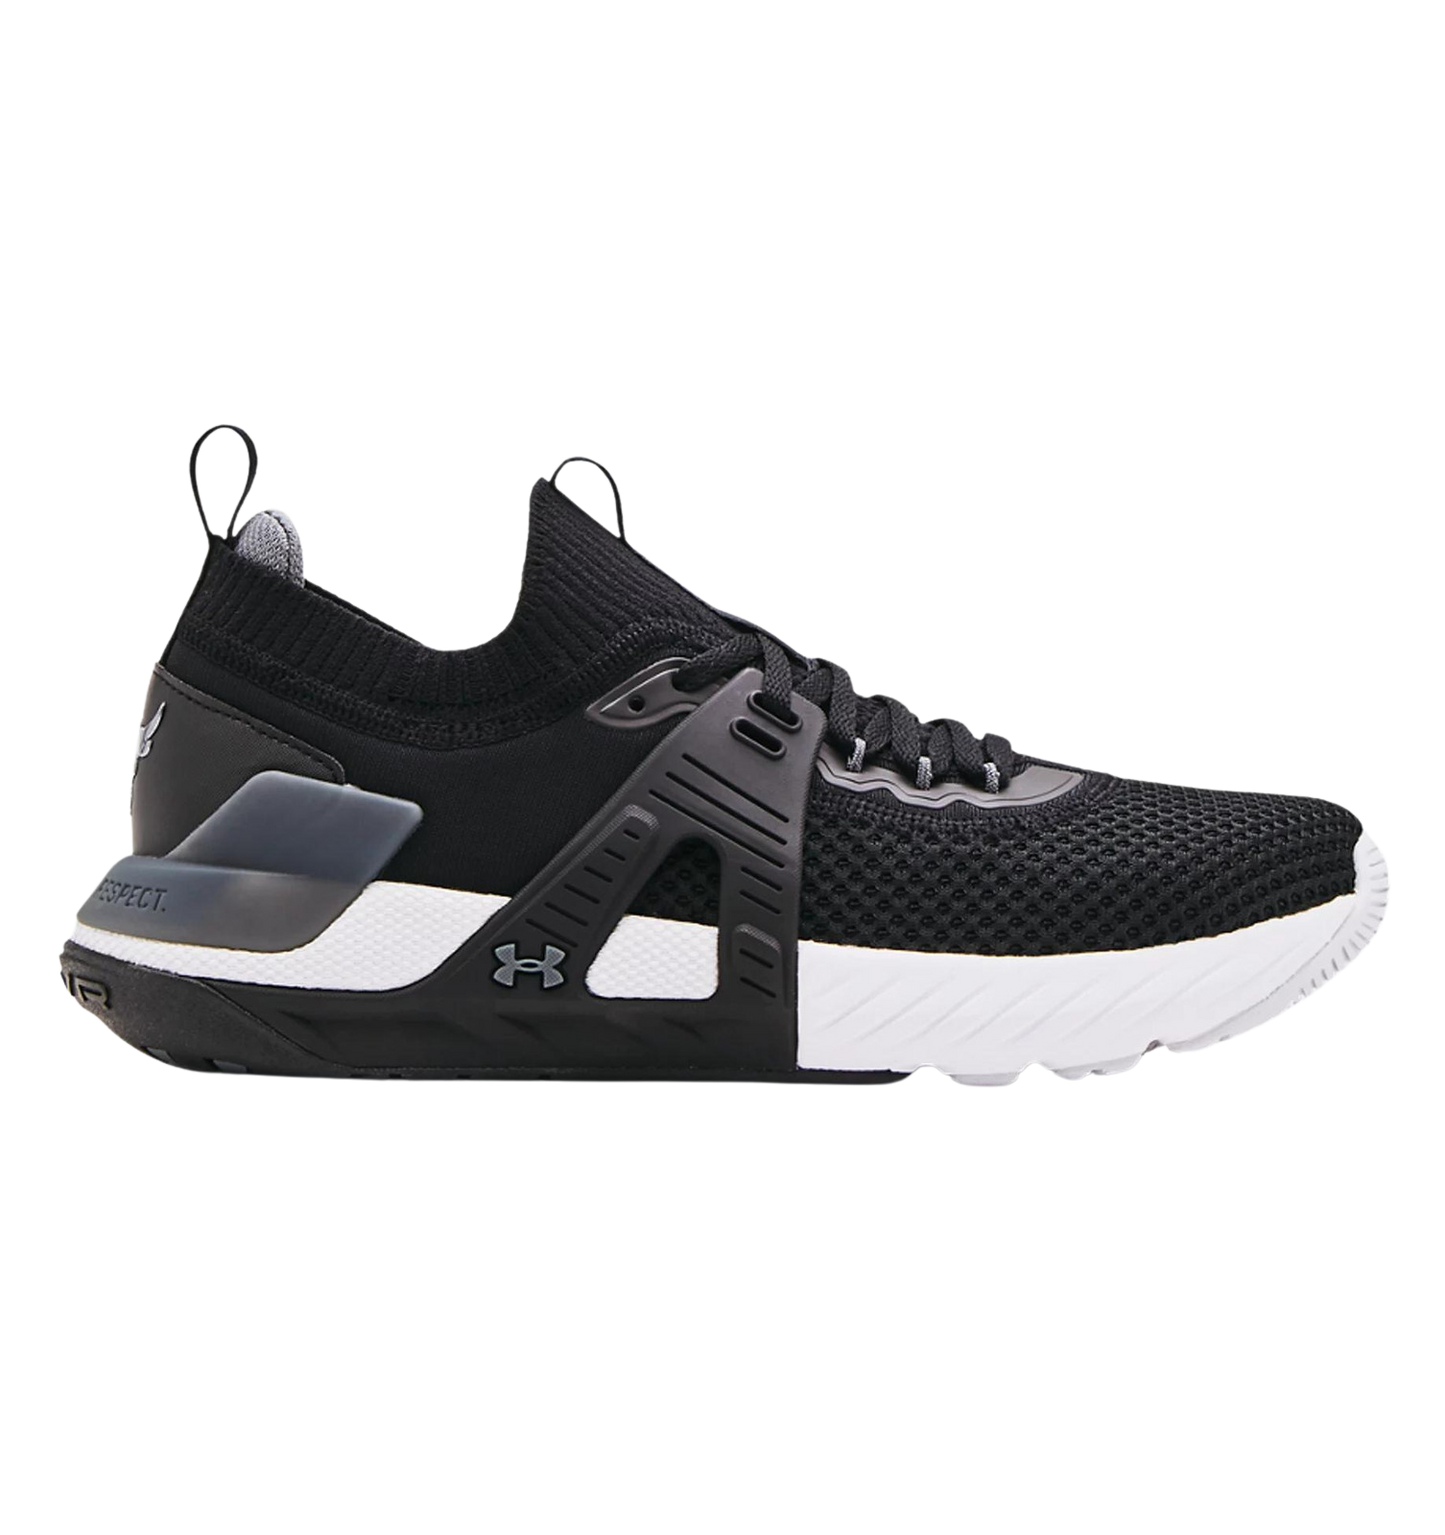 Under Armour Mens Project Rock 4 Black/White/Pitch Gray - (3023695-001) - HV - R2L18